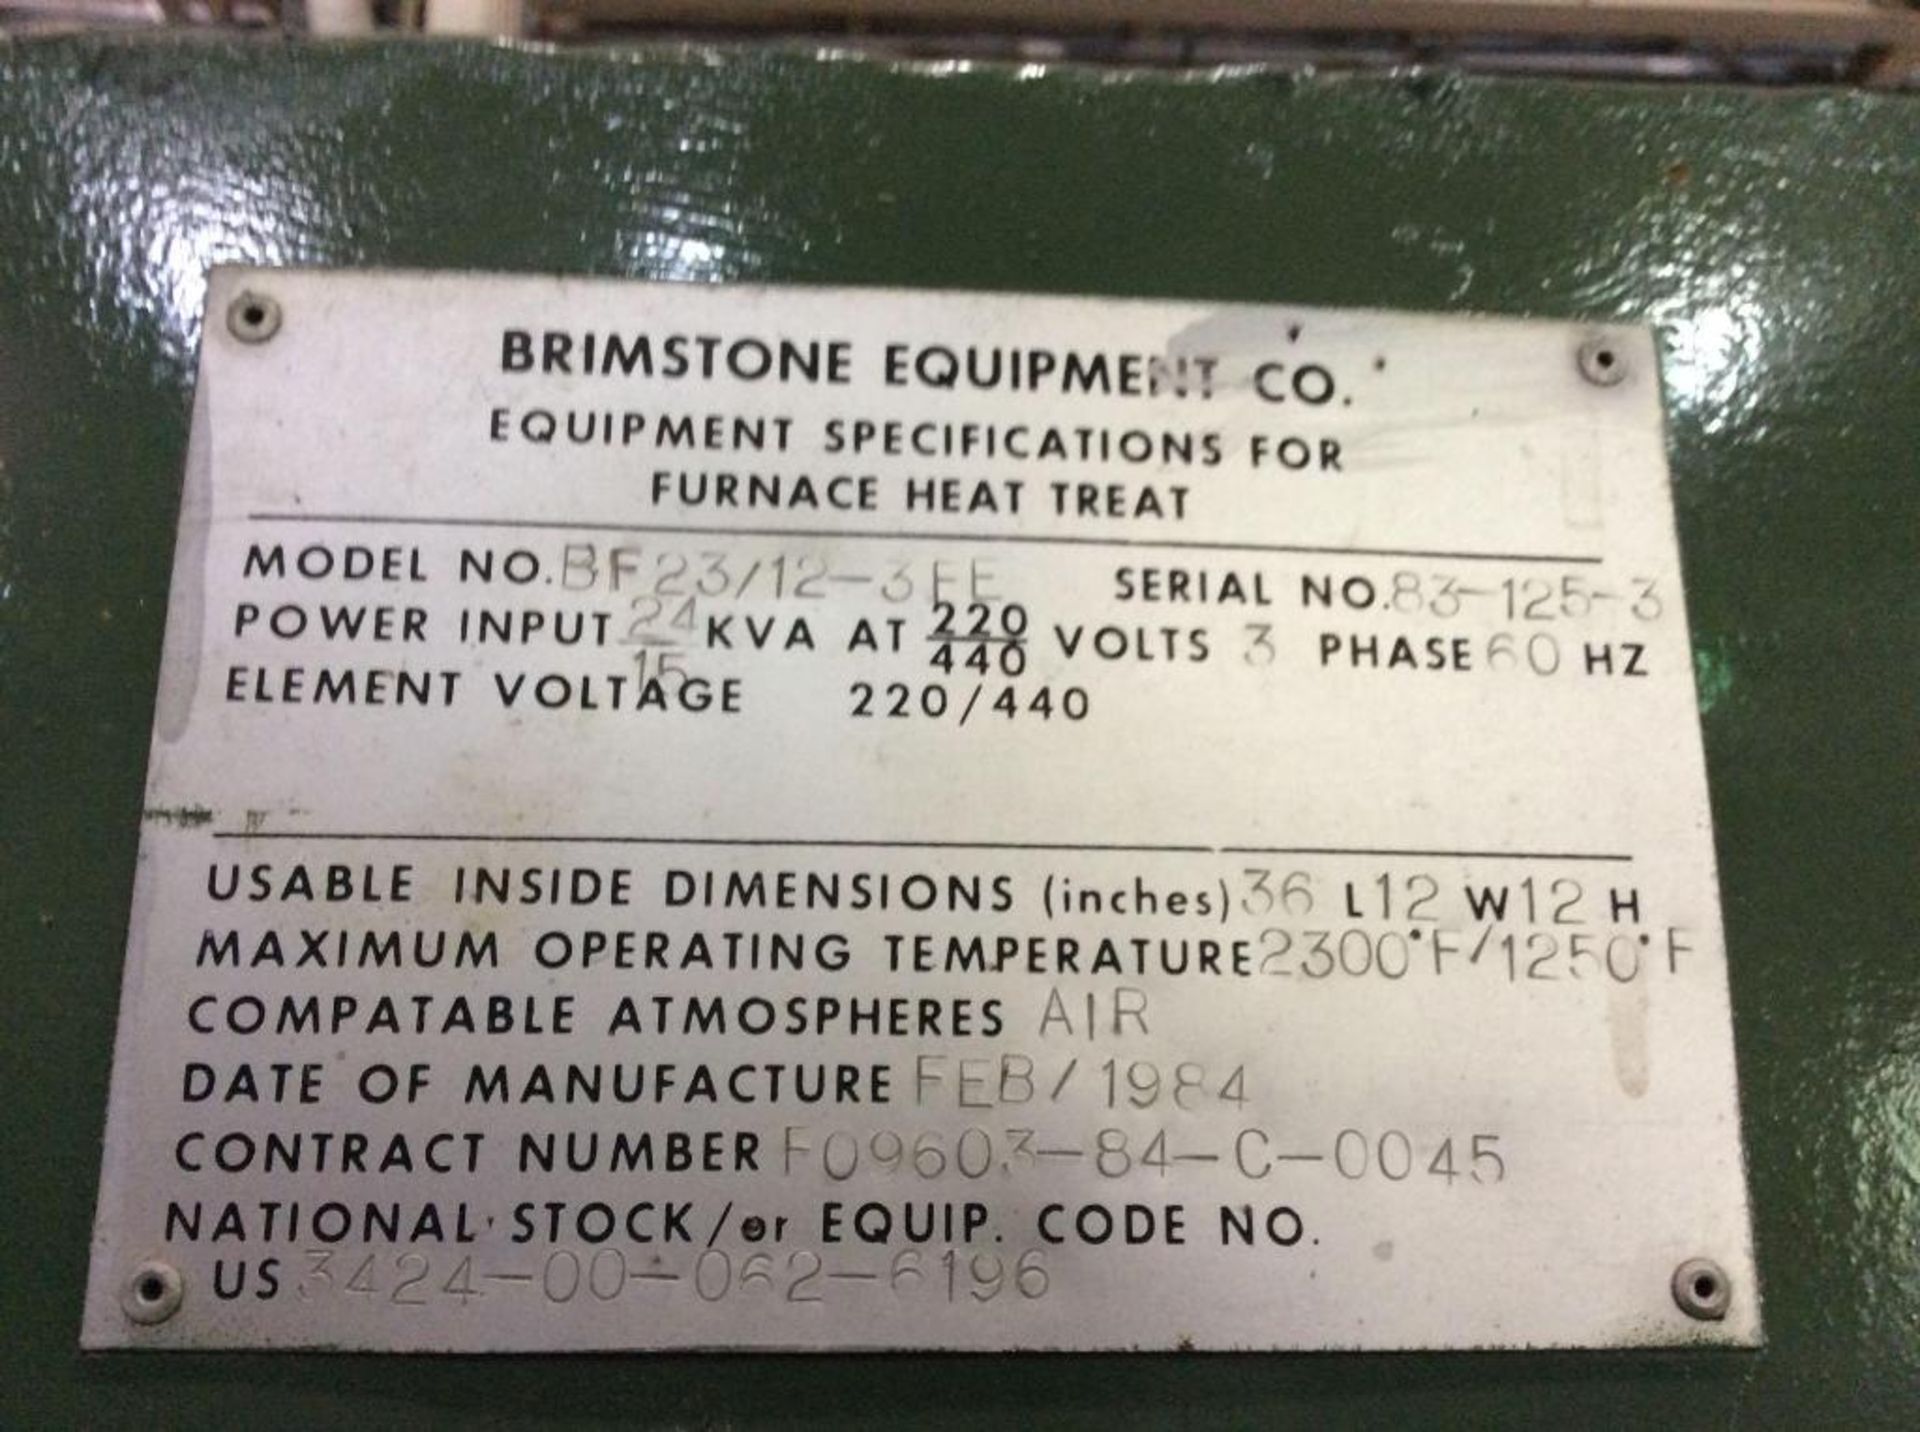 Brimstone oven, mn BF23/12-3FE, sn 83-125-3, 440 volt, 3 phase, (2) 36" x 12" x 12" compartments - Image 4 of 4